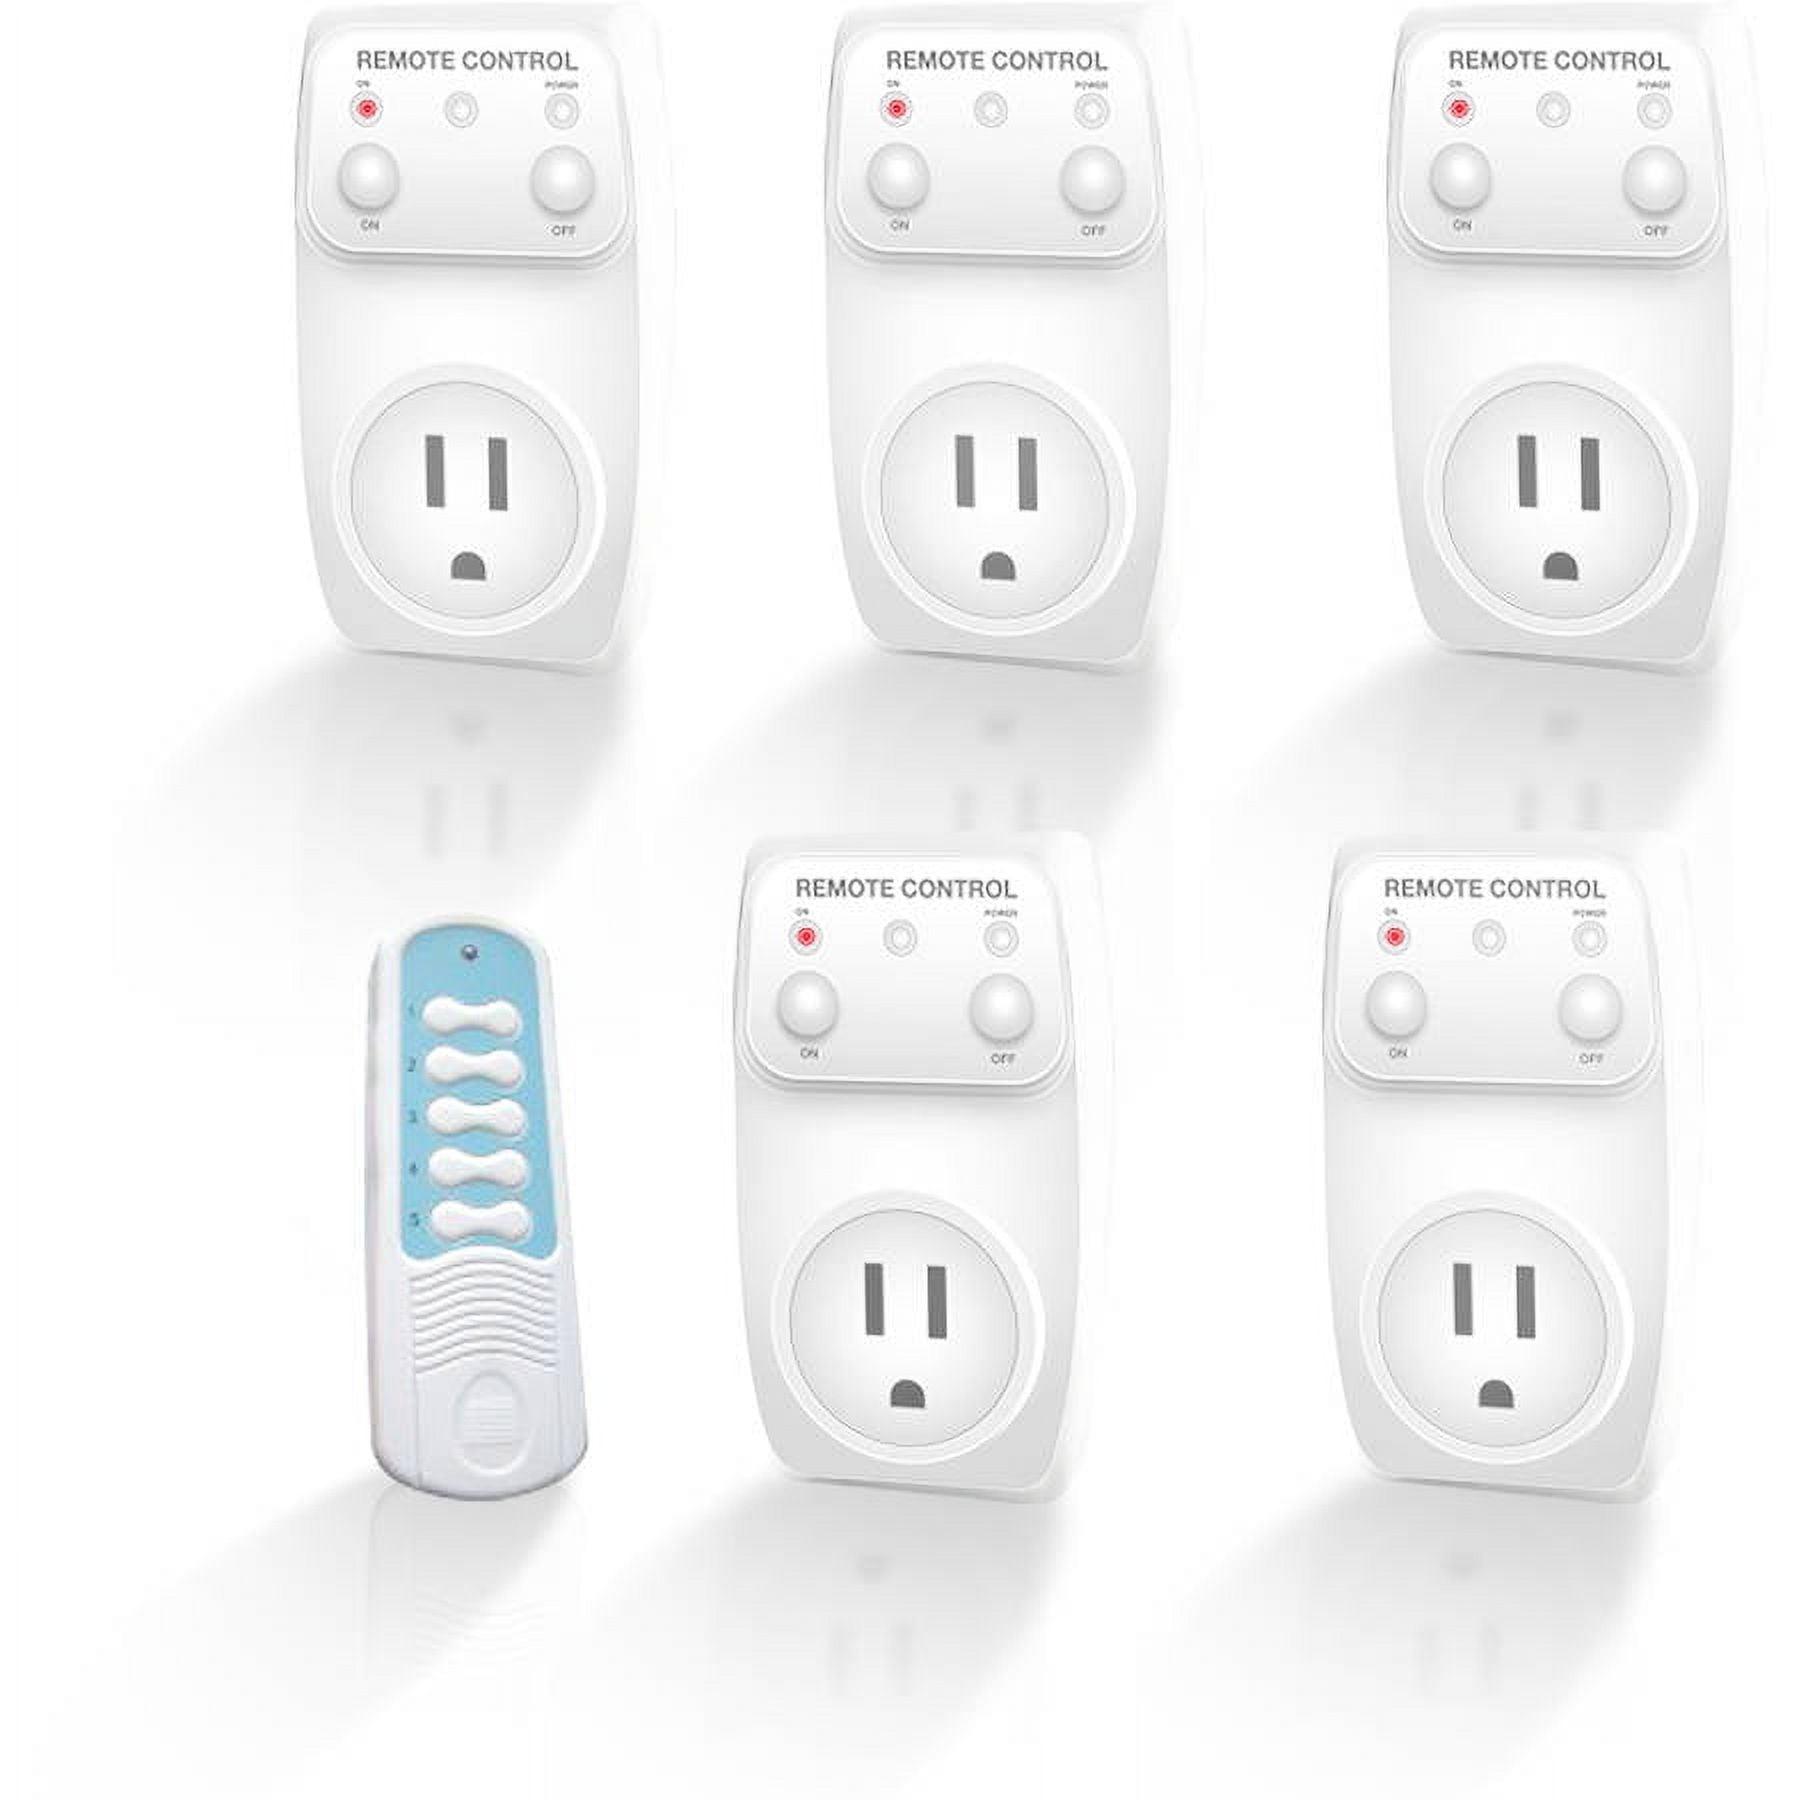 BN-LINK Wireless Remote Control Outlet with Extra Long Range, for Household  Appliances, White (2 Remotes + 5 Outlets) 